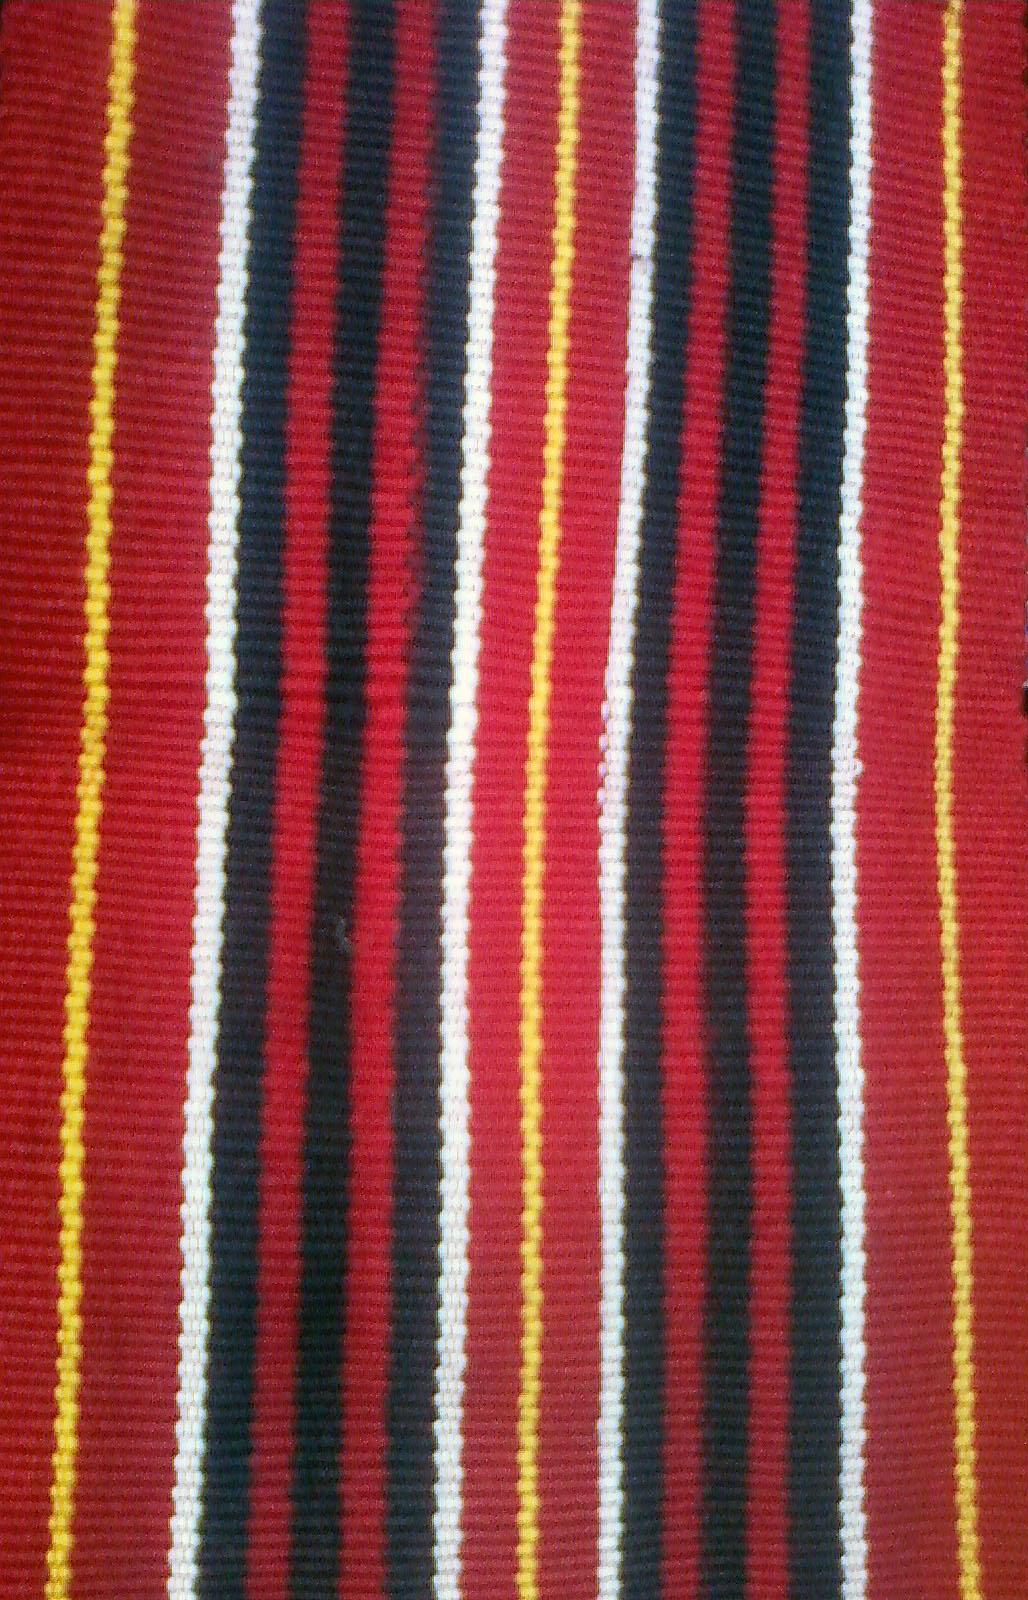 1st Belt: Close up of Kalinga Belt completed in Spring, 2012 by Holly Calica.